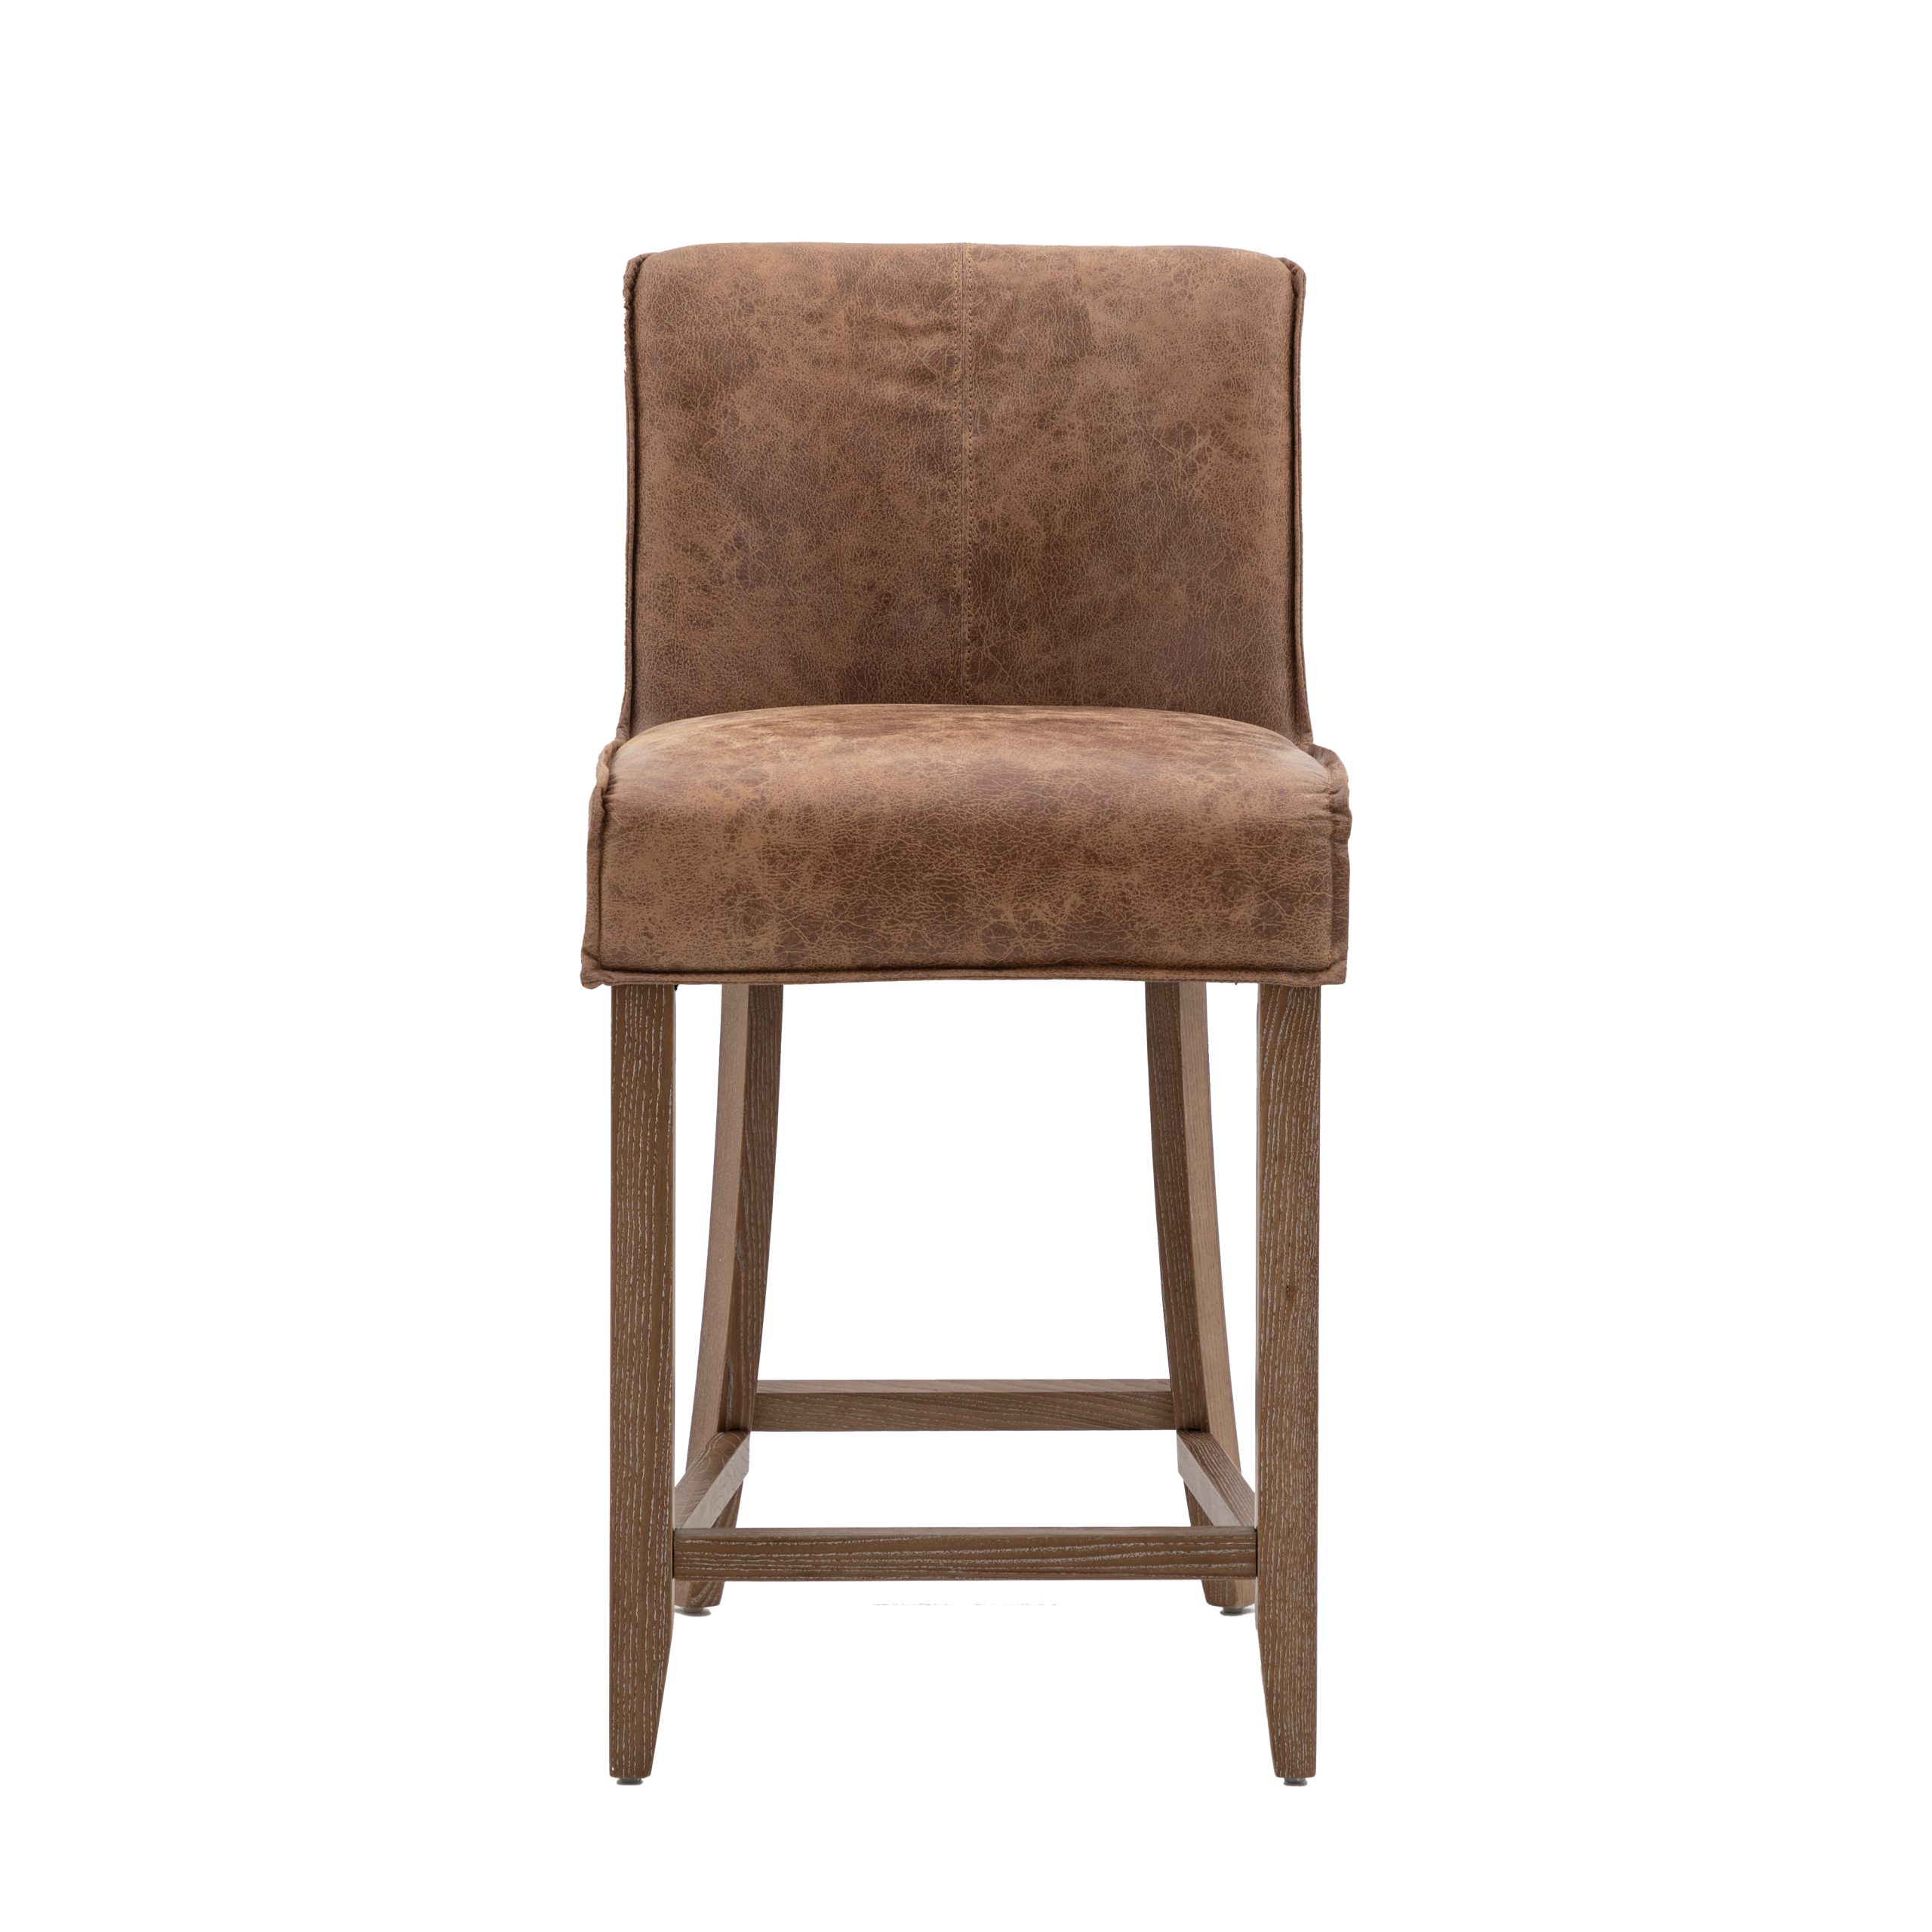 Gallery Direct Tarnby Bar Stool Brown Leather (Set of 2)